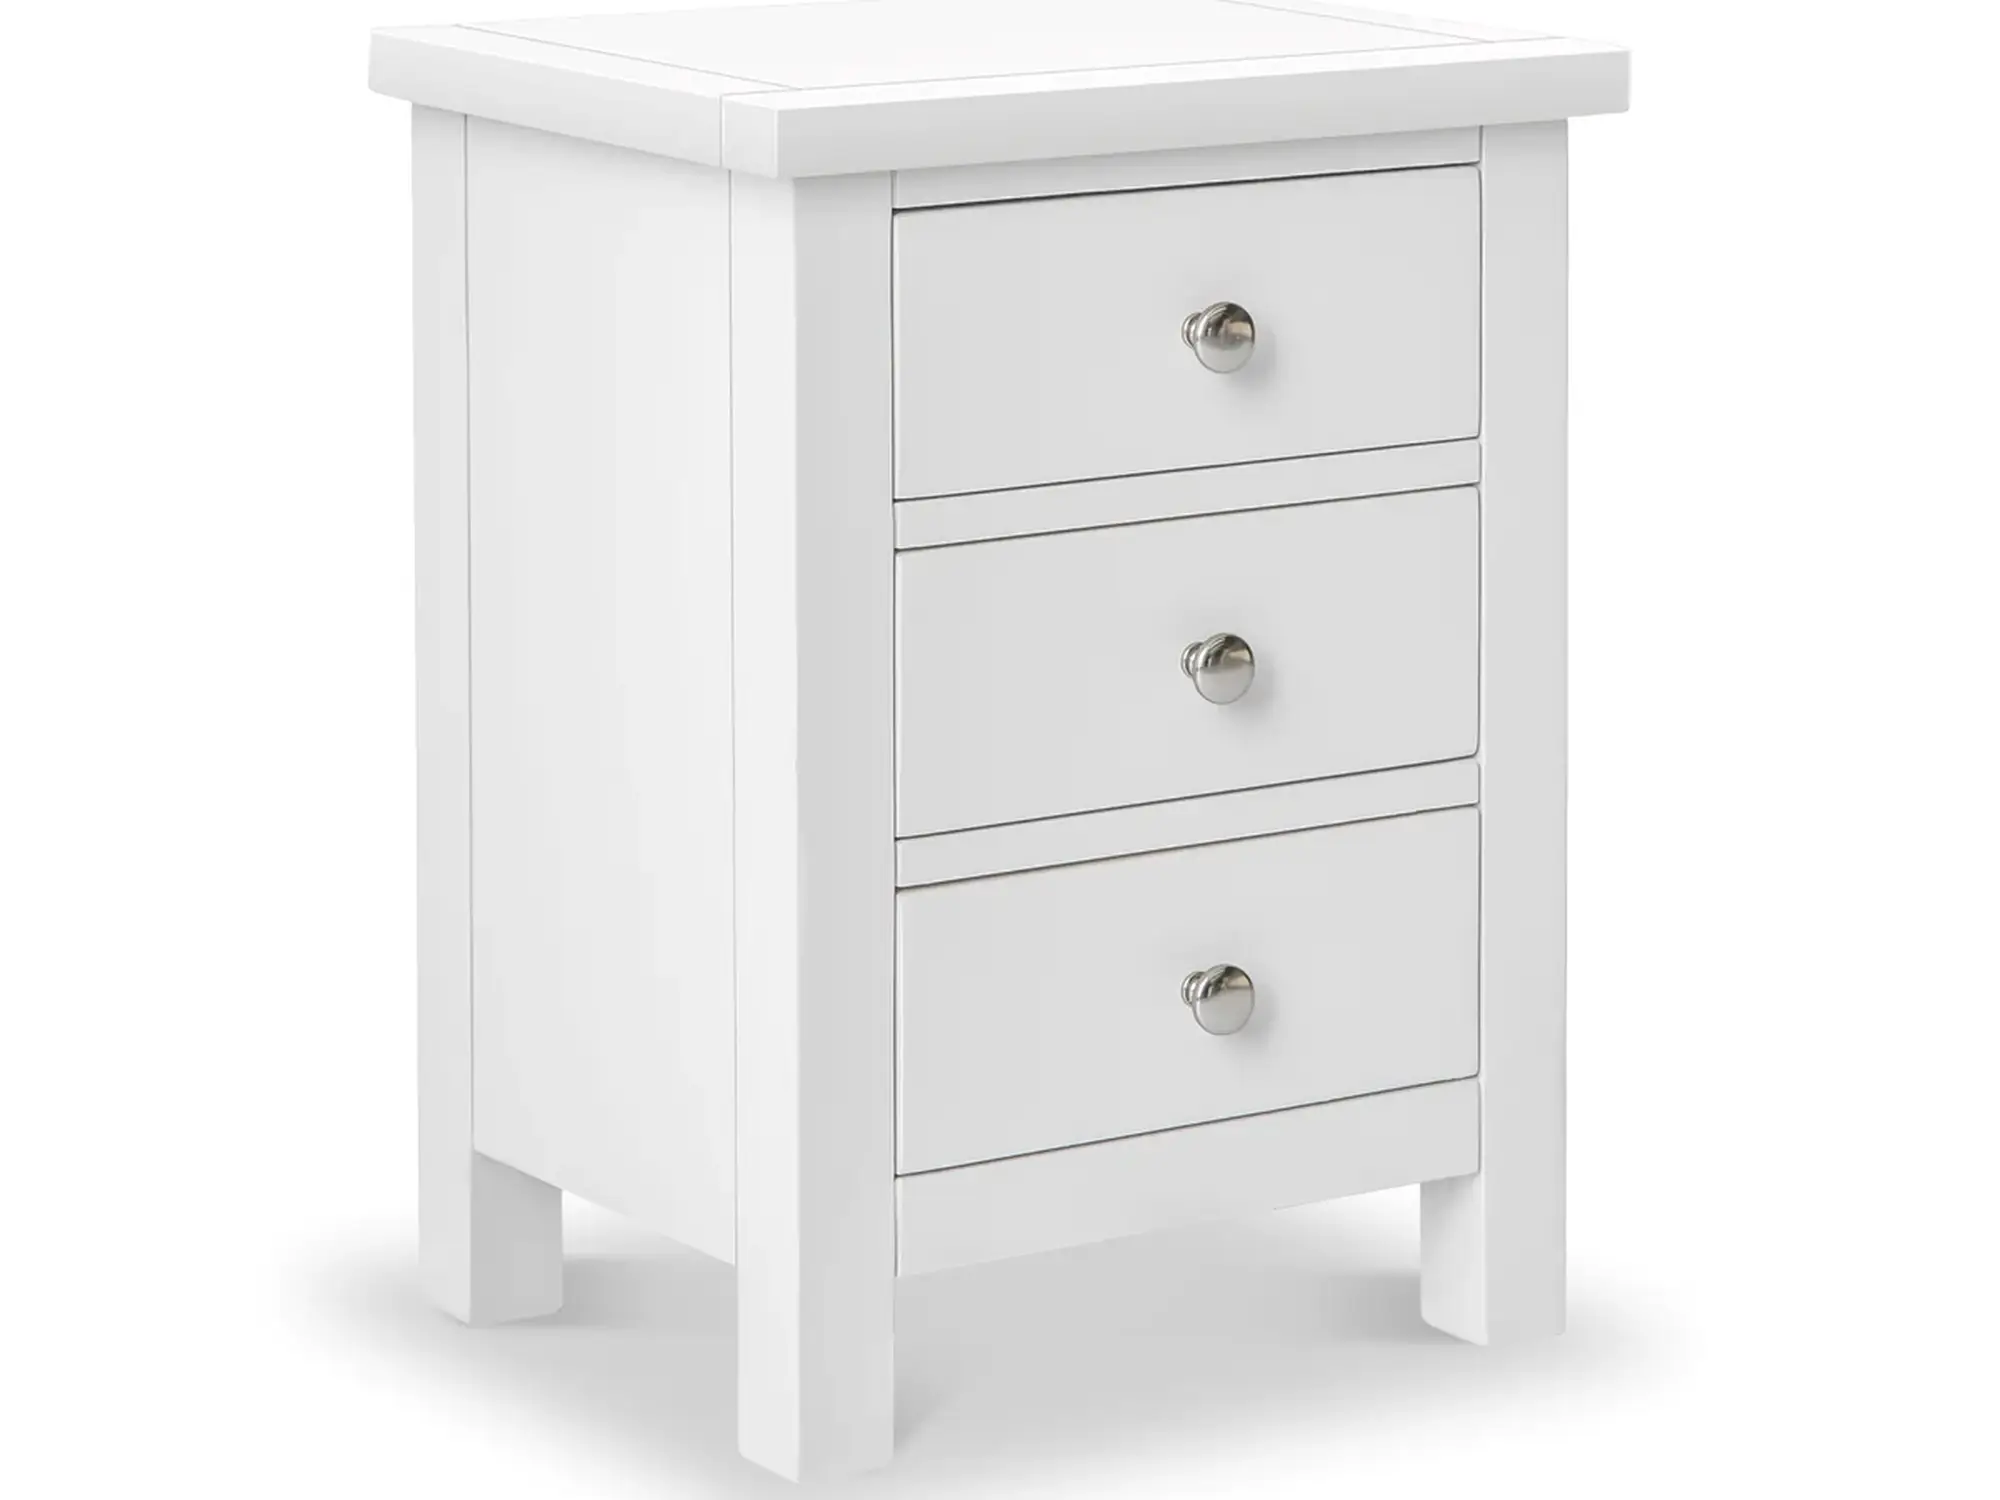 table-drawers-the-ideal-combination-of-style-and-utility